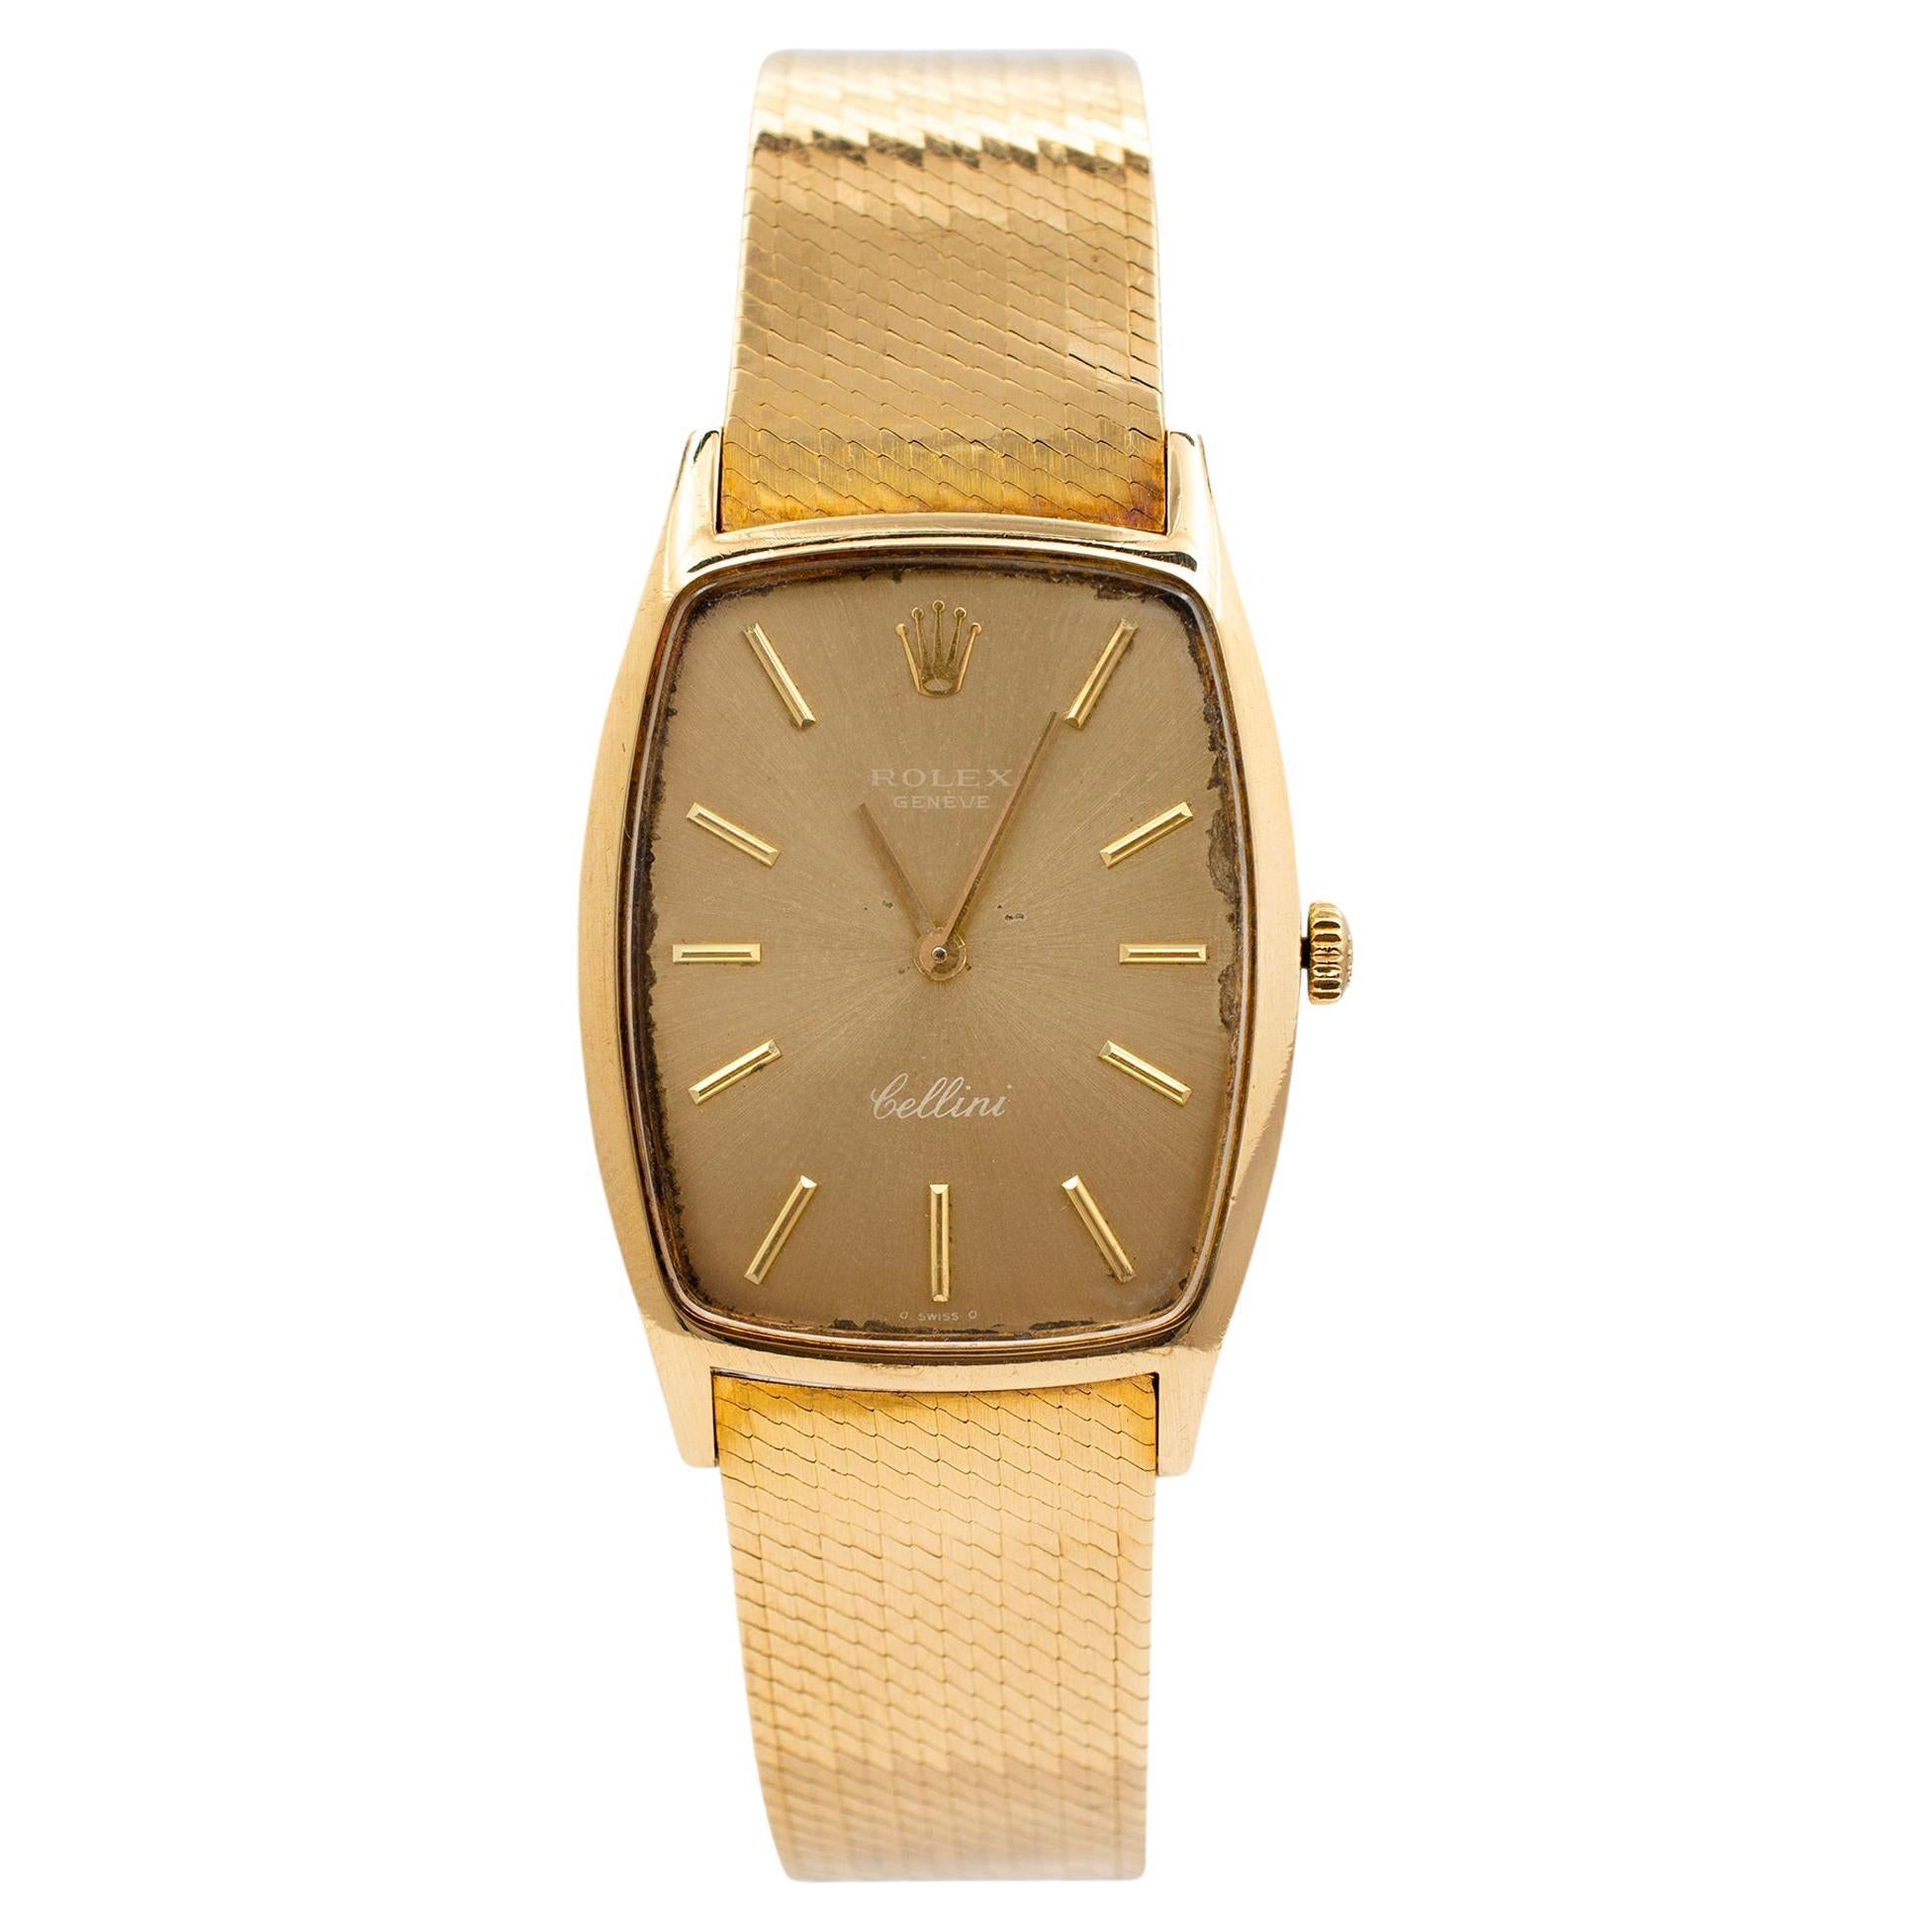 Vintage Rolex Cellini 26MM 3807 Champagne Dial 18K Yellow Gold Watch For Sale